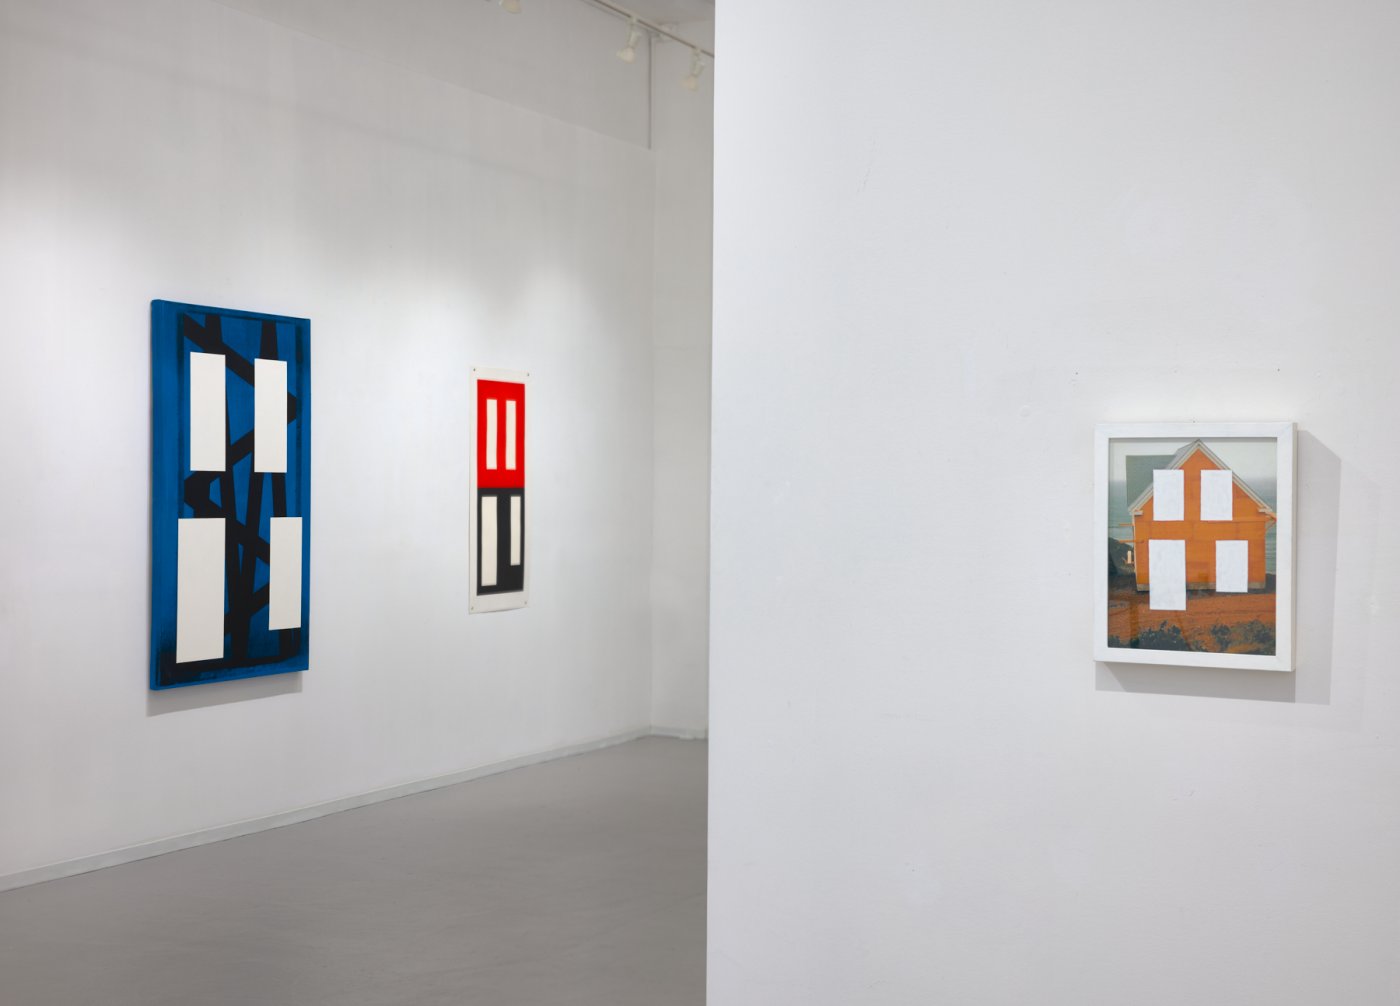 Installation image for Andrew Spence: Looking Back and Moving Forward, at David Richard Gallery